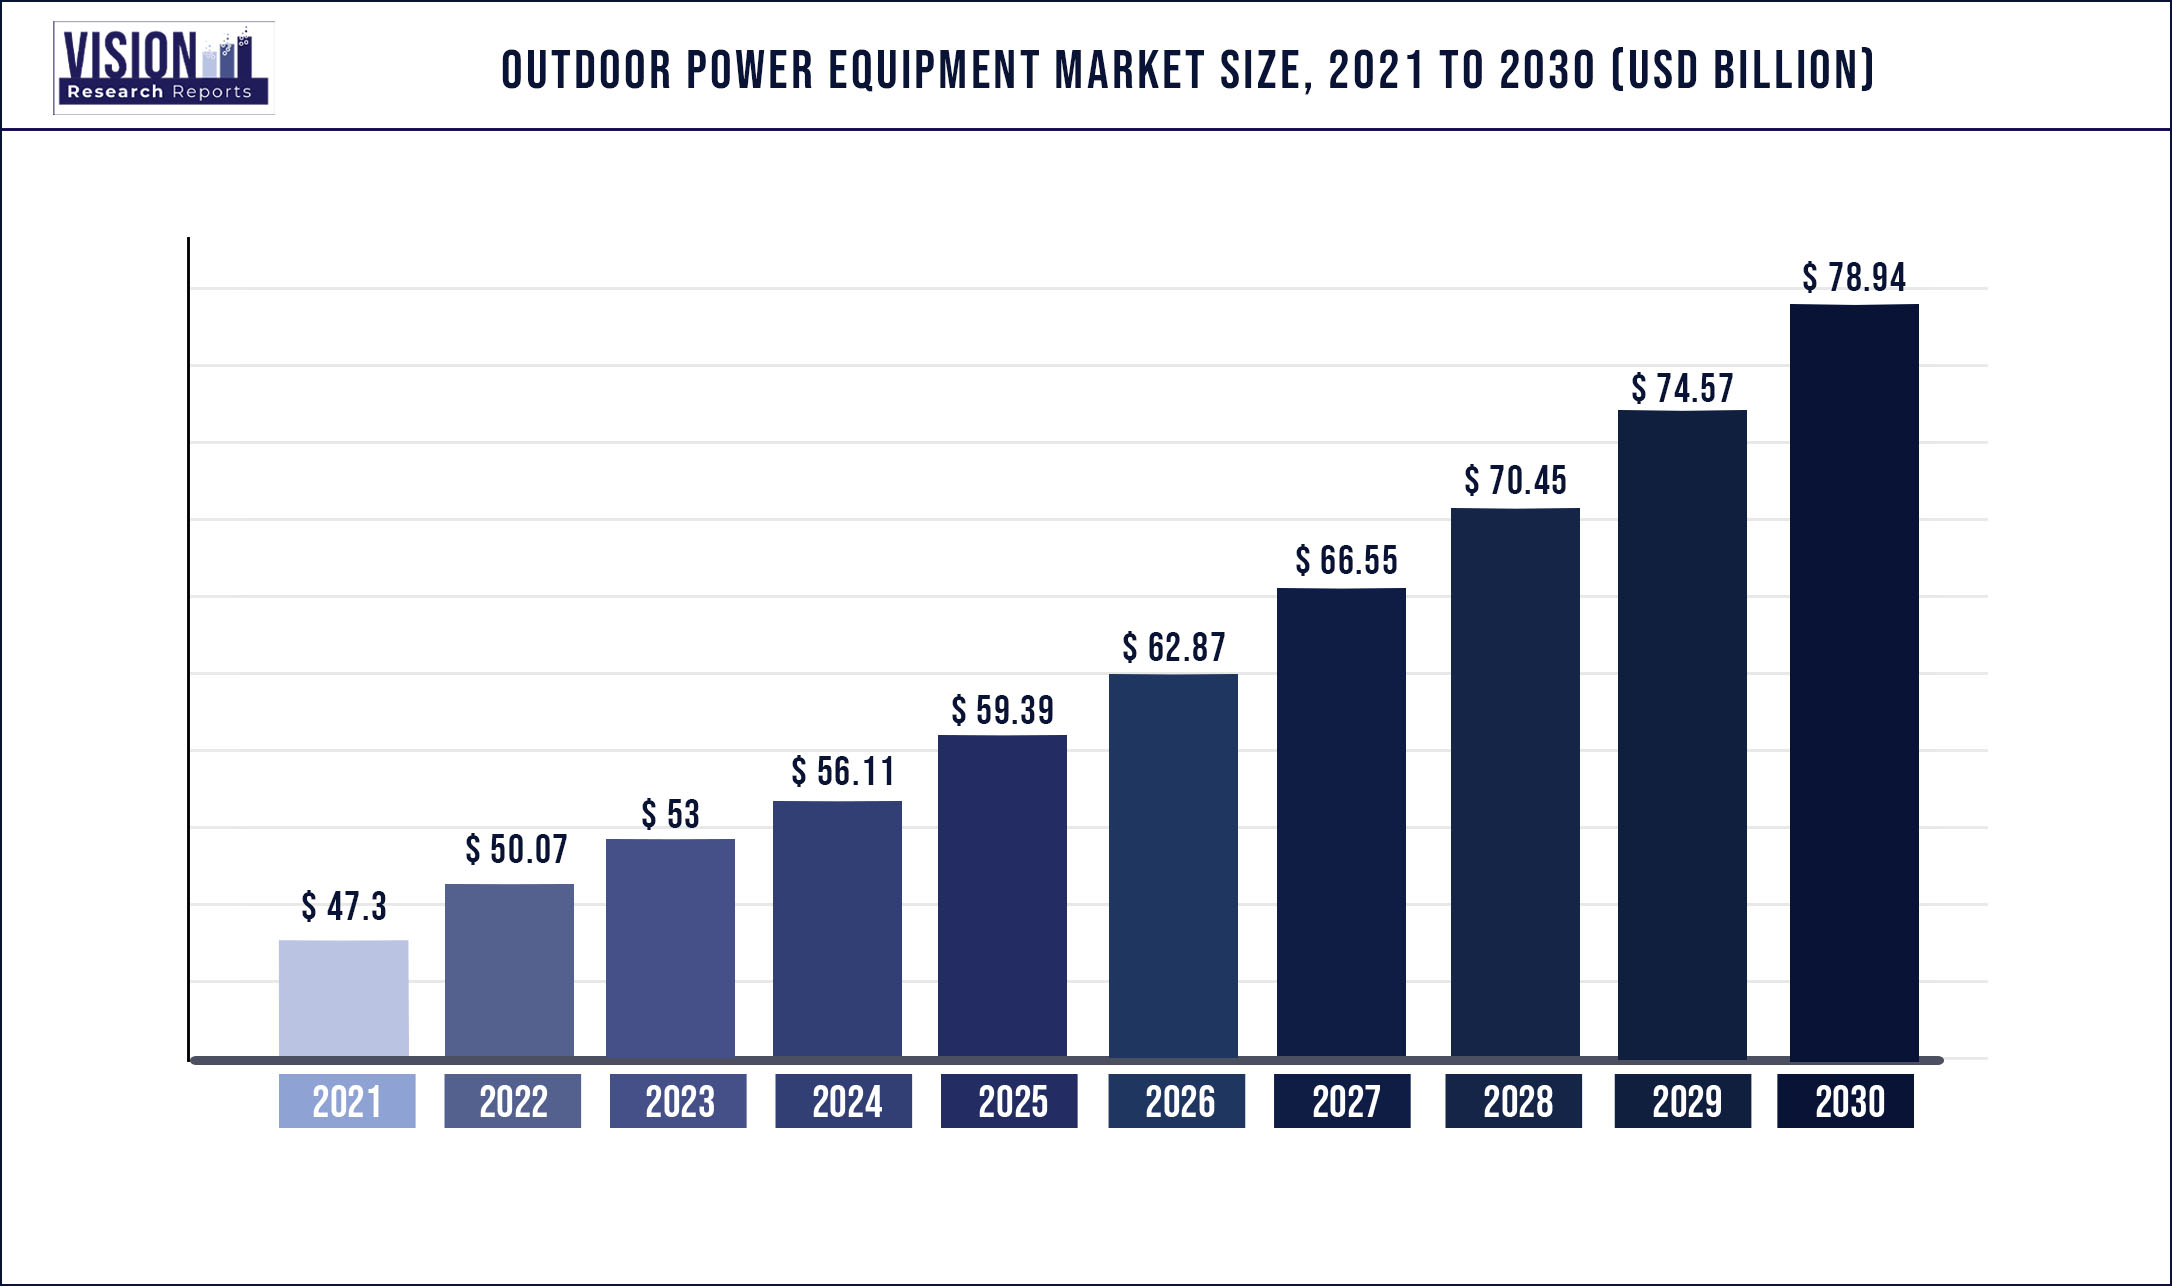 Outdoor Power Equipment Market Size 2021 to 2030